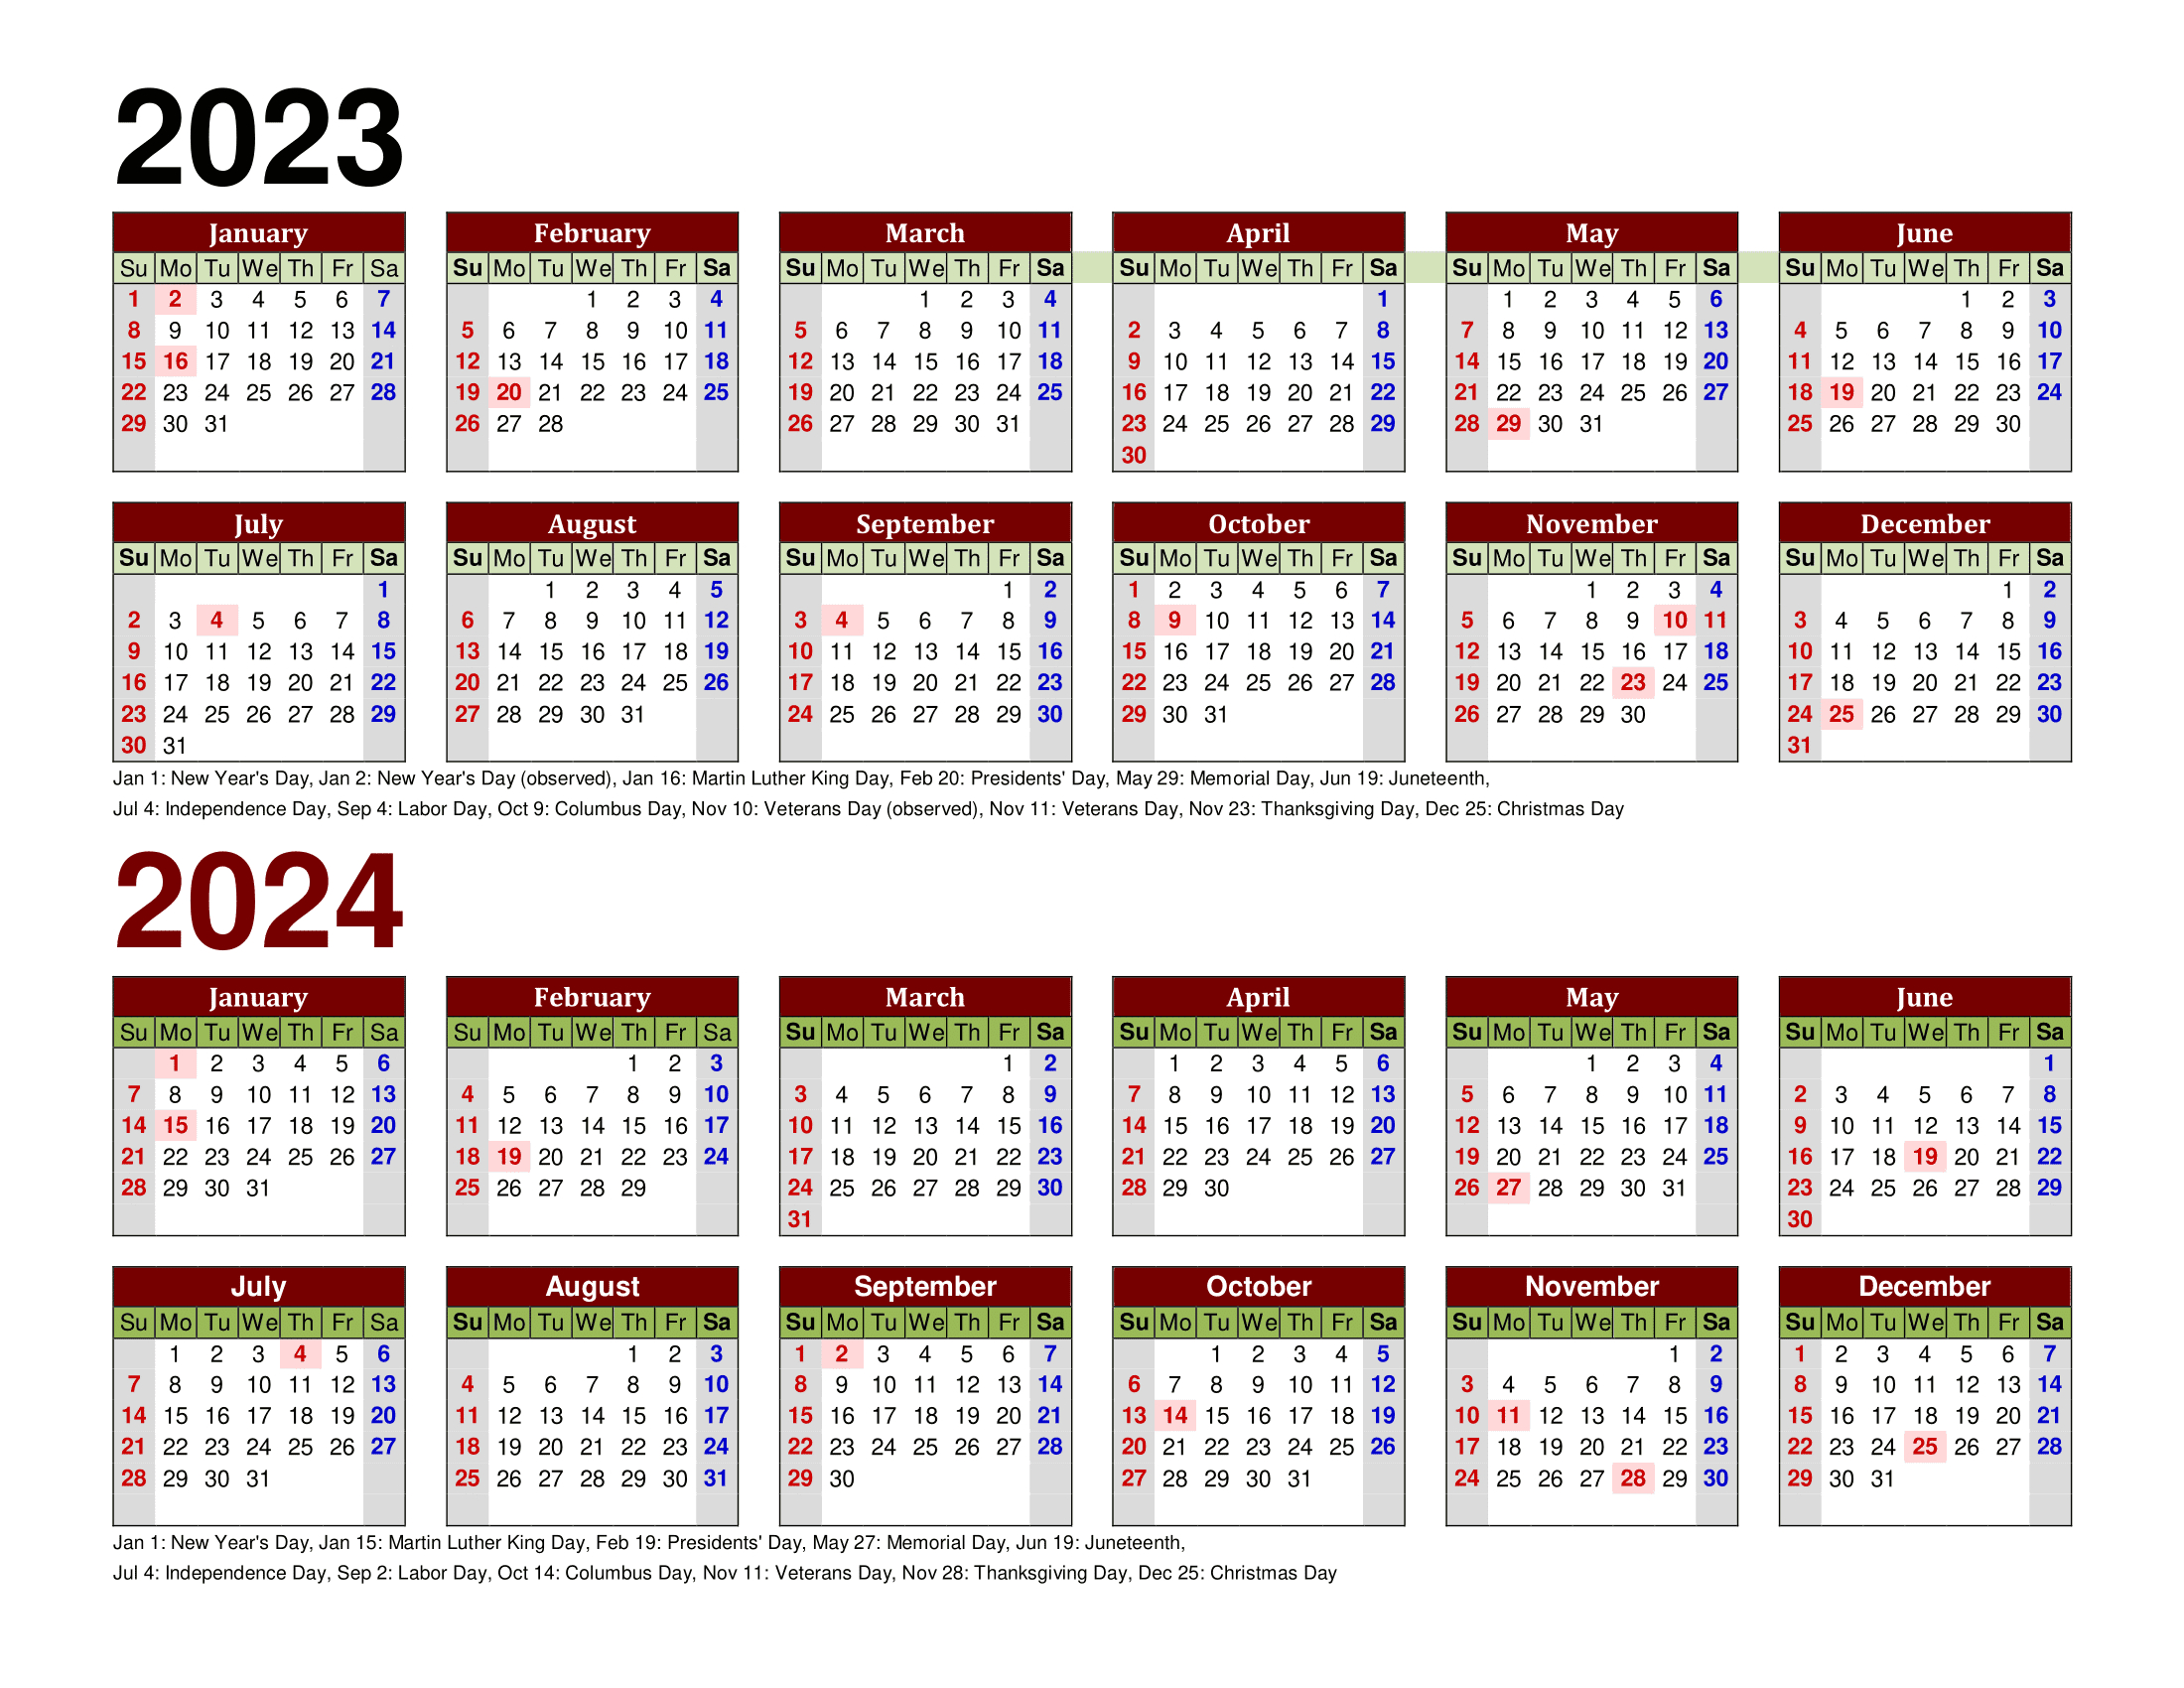 Free Printable Two Year Calendar Templates For 2023 And 2024 In Pdf | Yearly Calendar 2023 And 2024 Printable Free